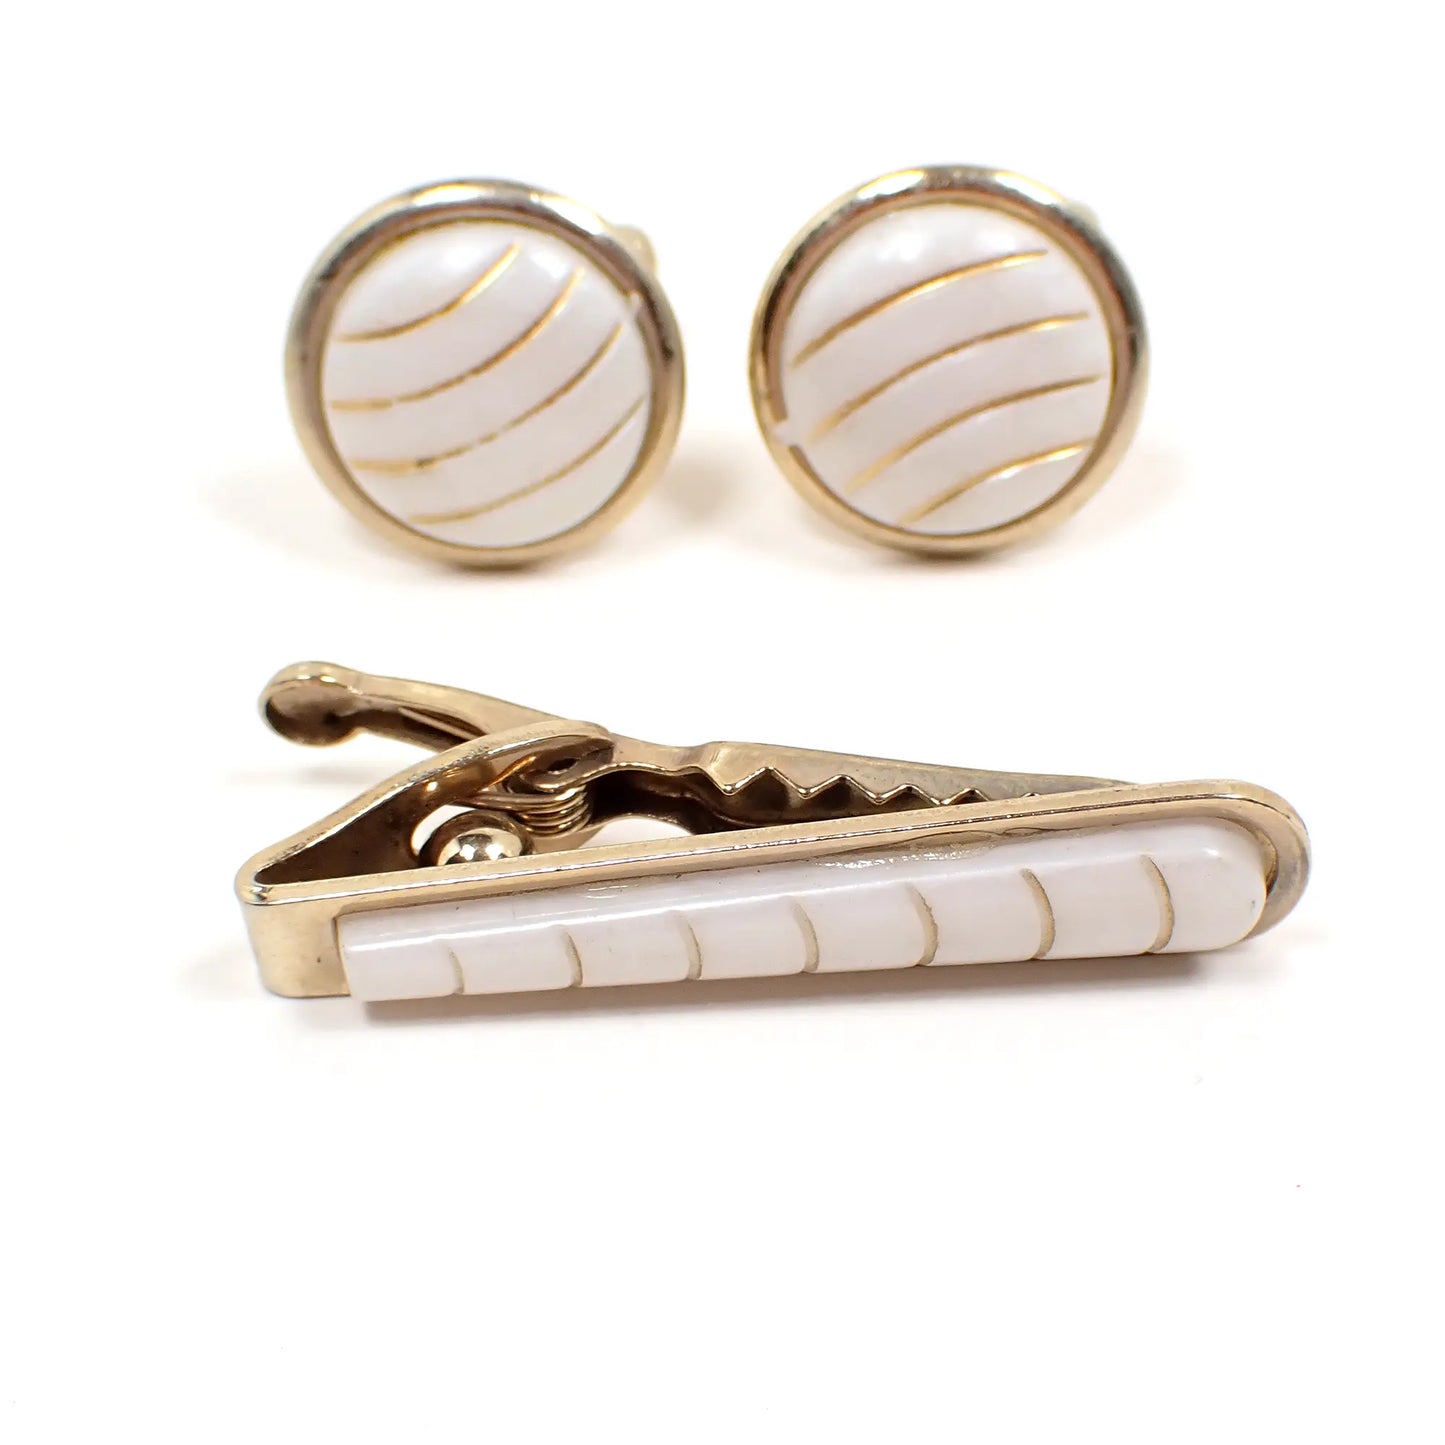 1970's White Plastic and Gold Tone Vintage Men's Jewelry Set, Tie Clip Clasp and Cufflinks Cuff Links